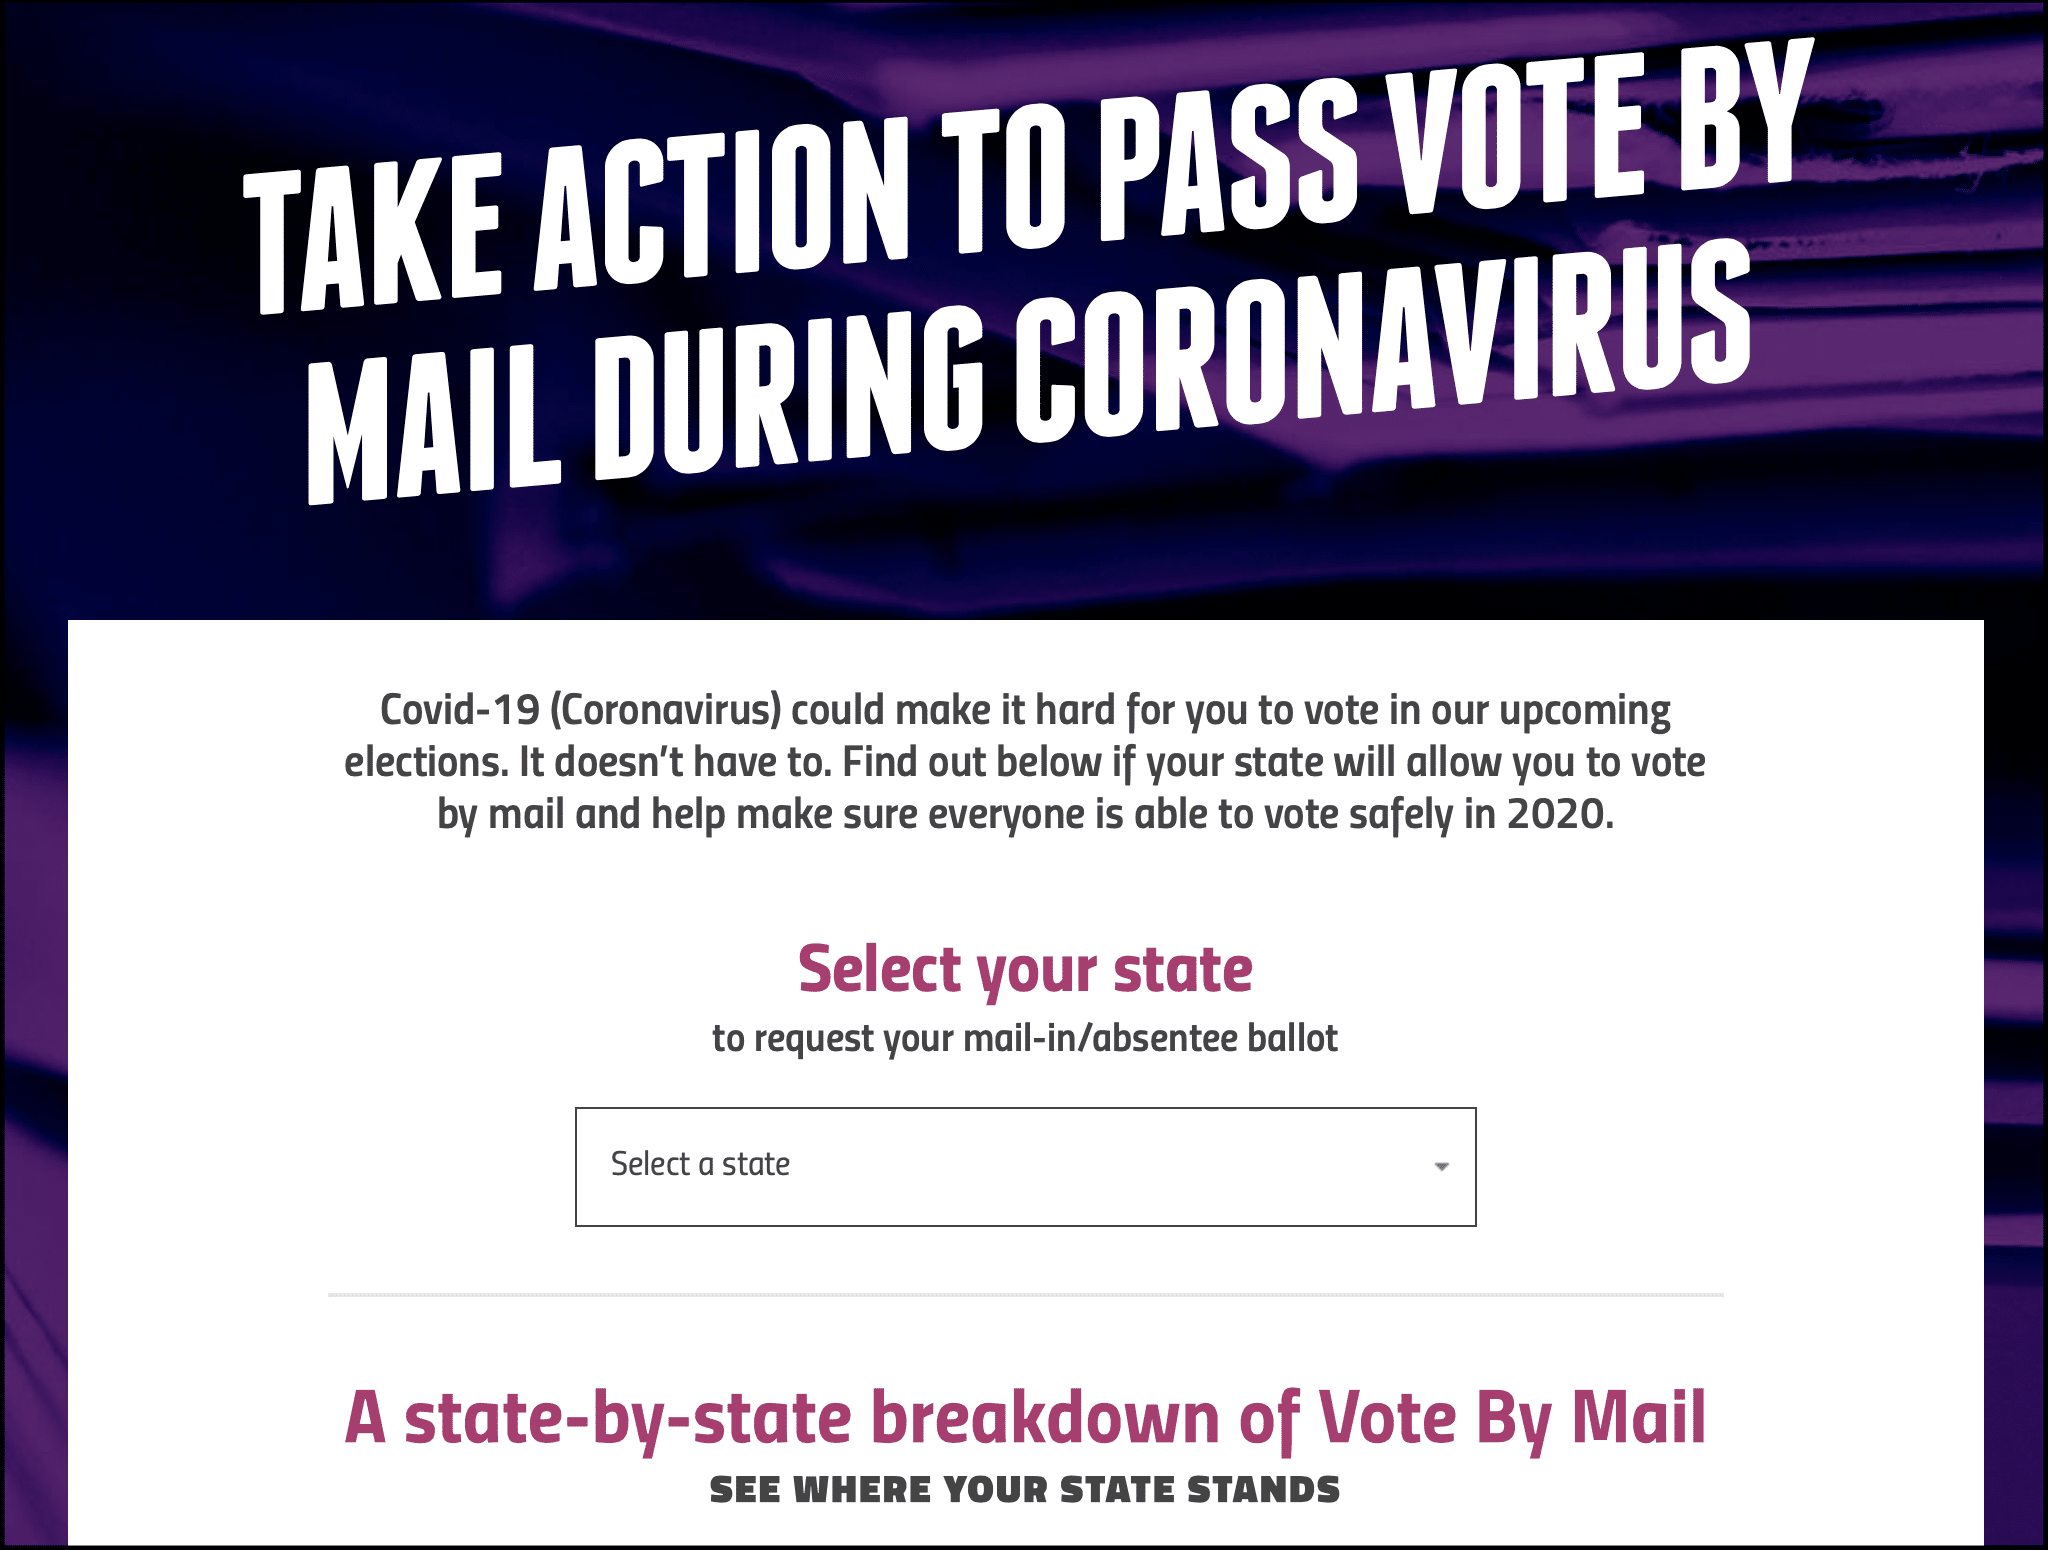 RepresentUS Vote By Mail Campaign